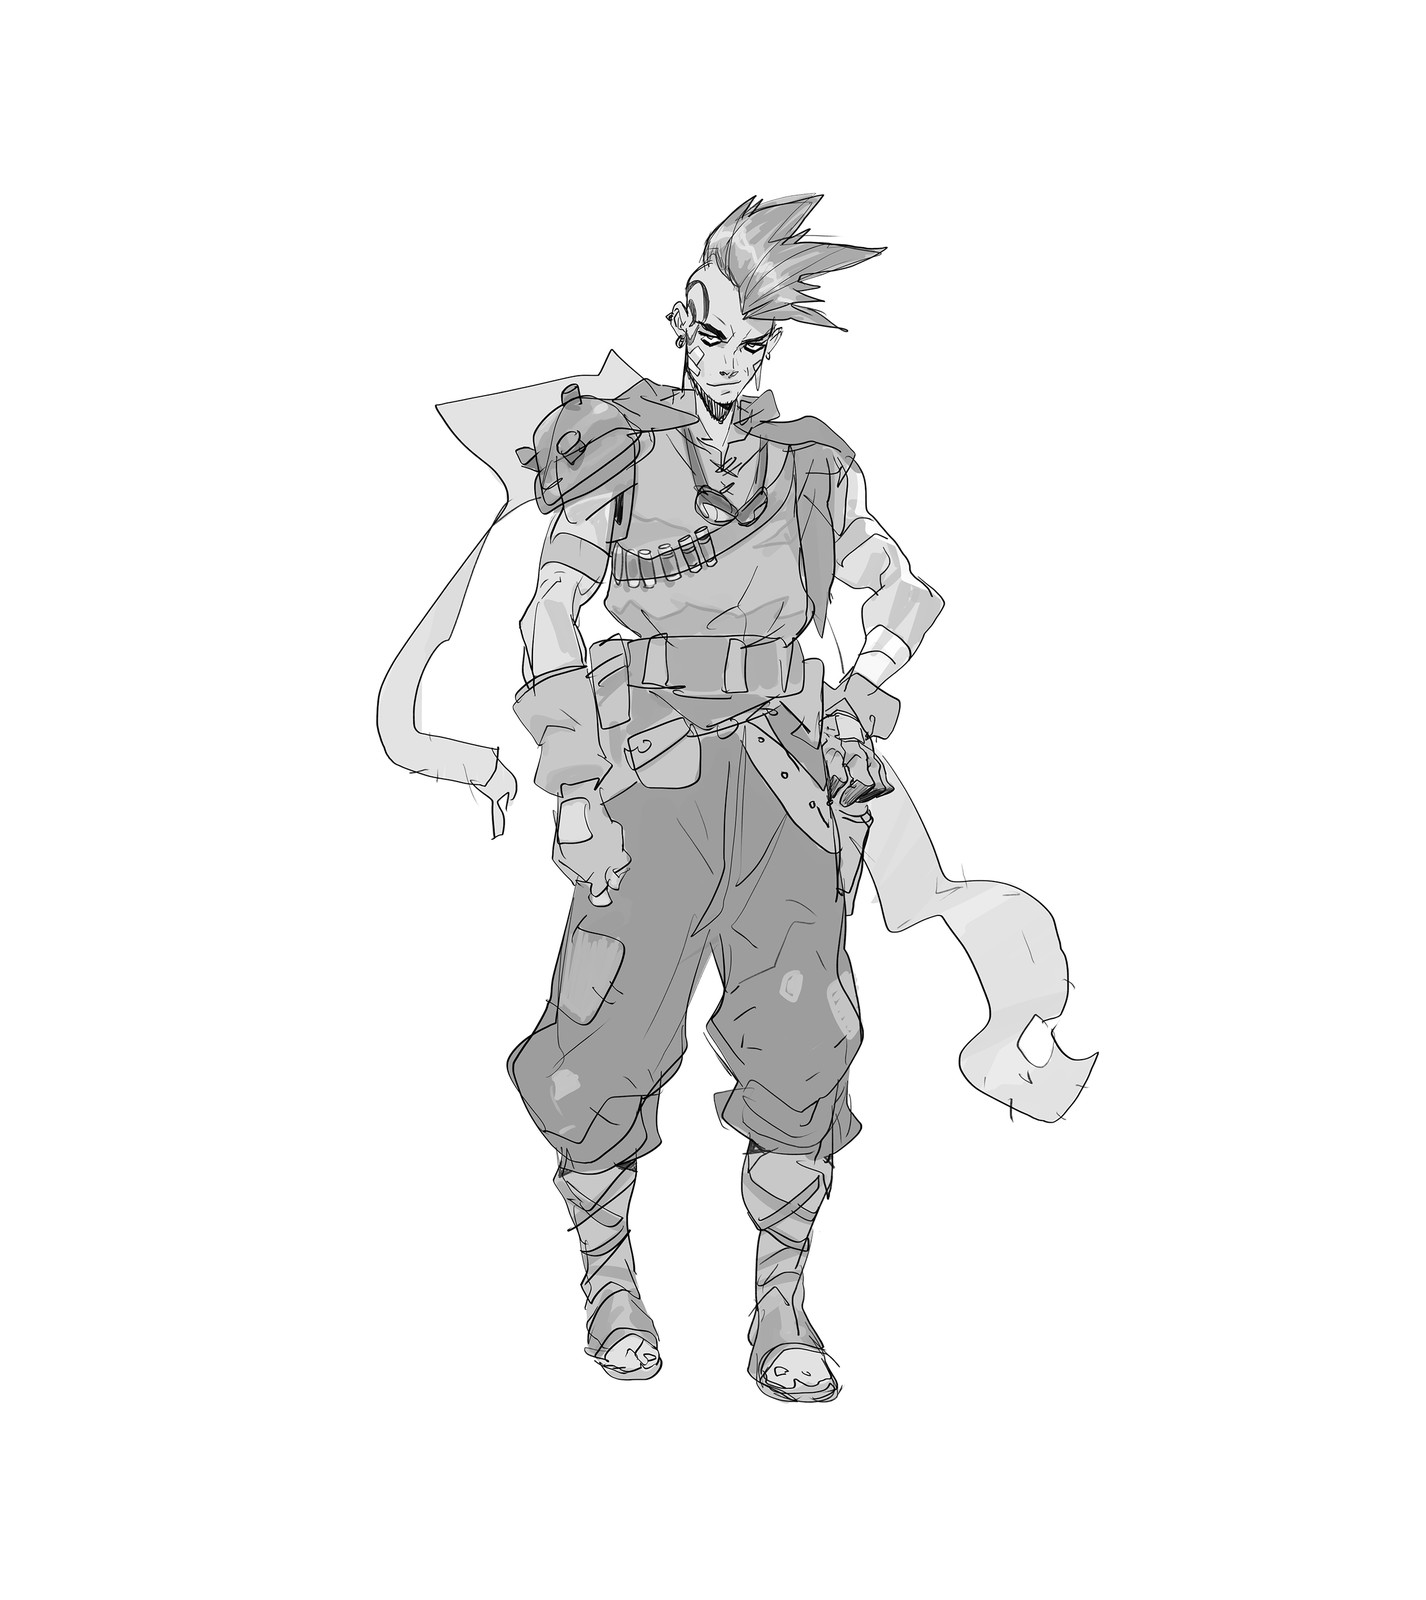 Character Design & Sketches #4